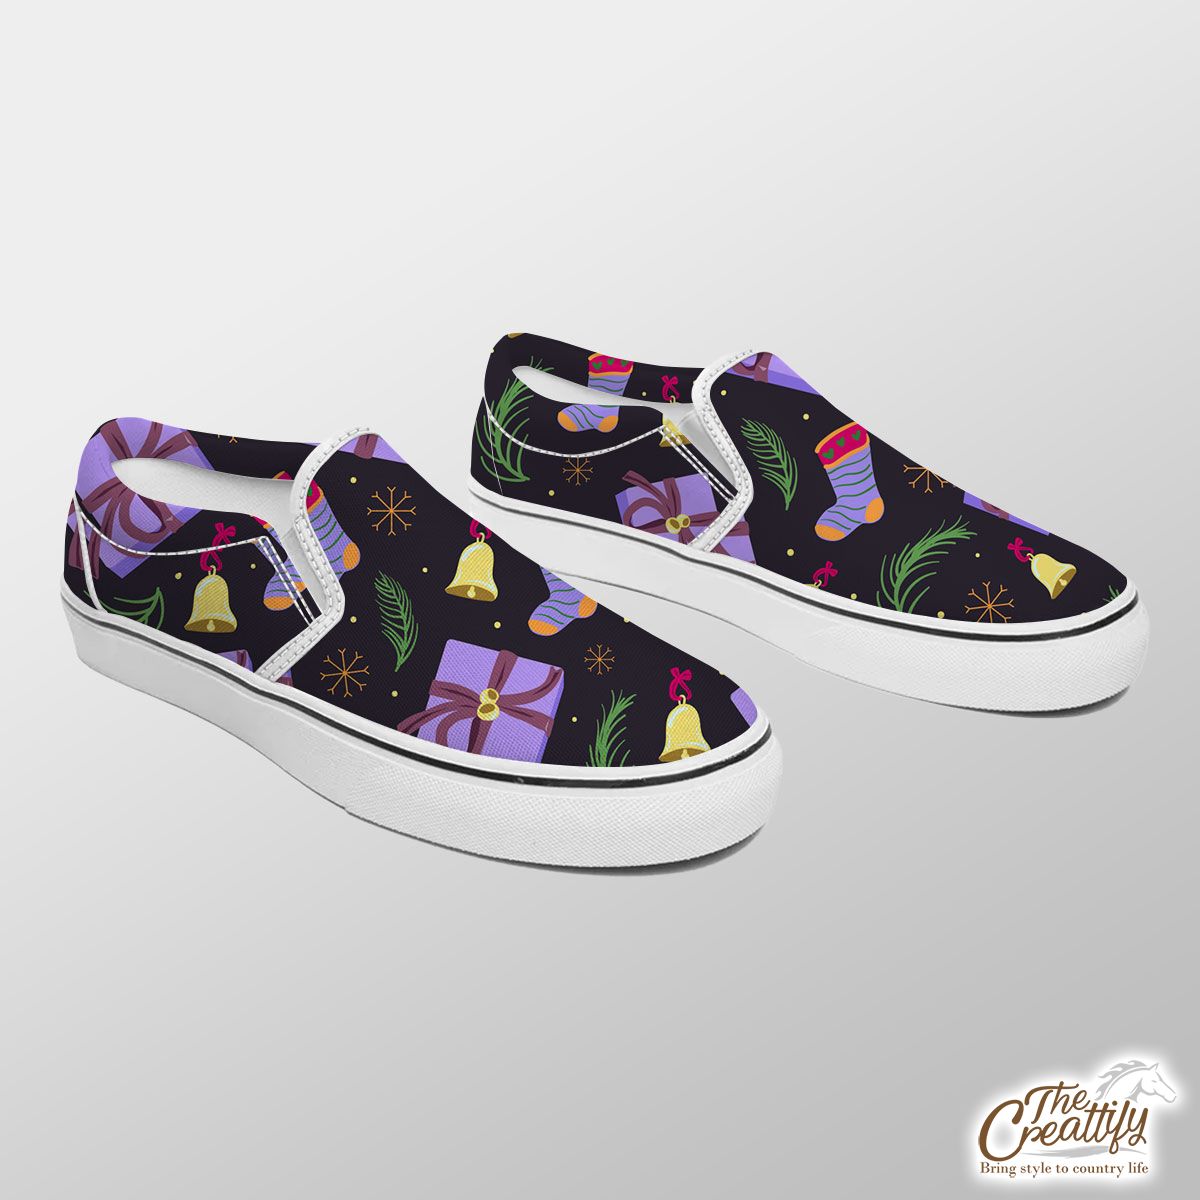 Purple Christmas Gifts And Socks With Bells On The Snowflake Dark Background Slip On Sneakers